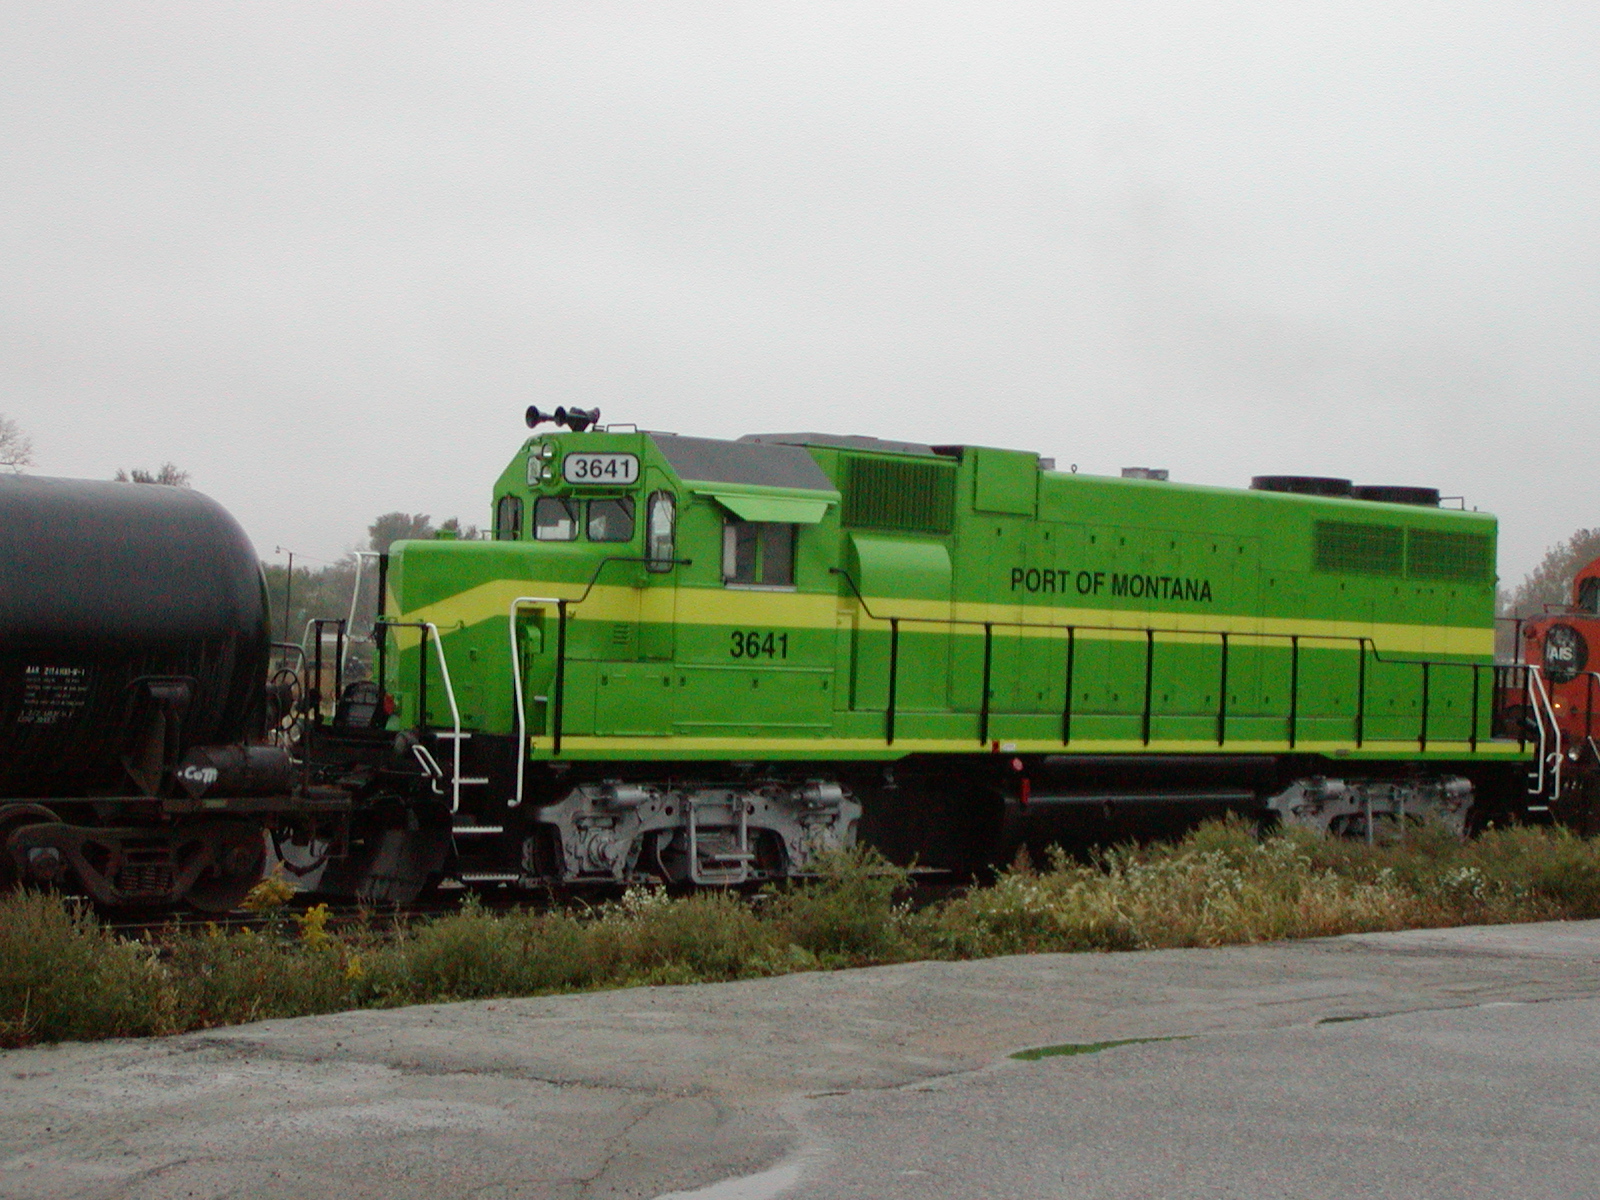 Another look at NREX 3641 in Council Bluffs, IA.  The unit is a GP38AC.